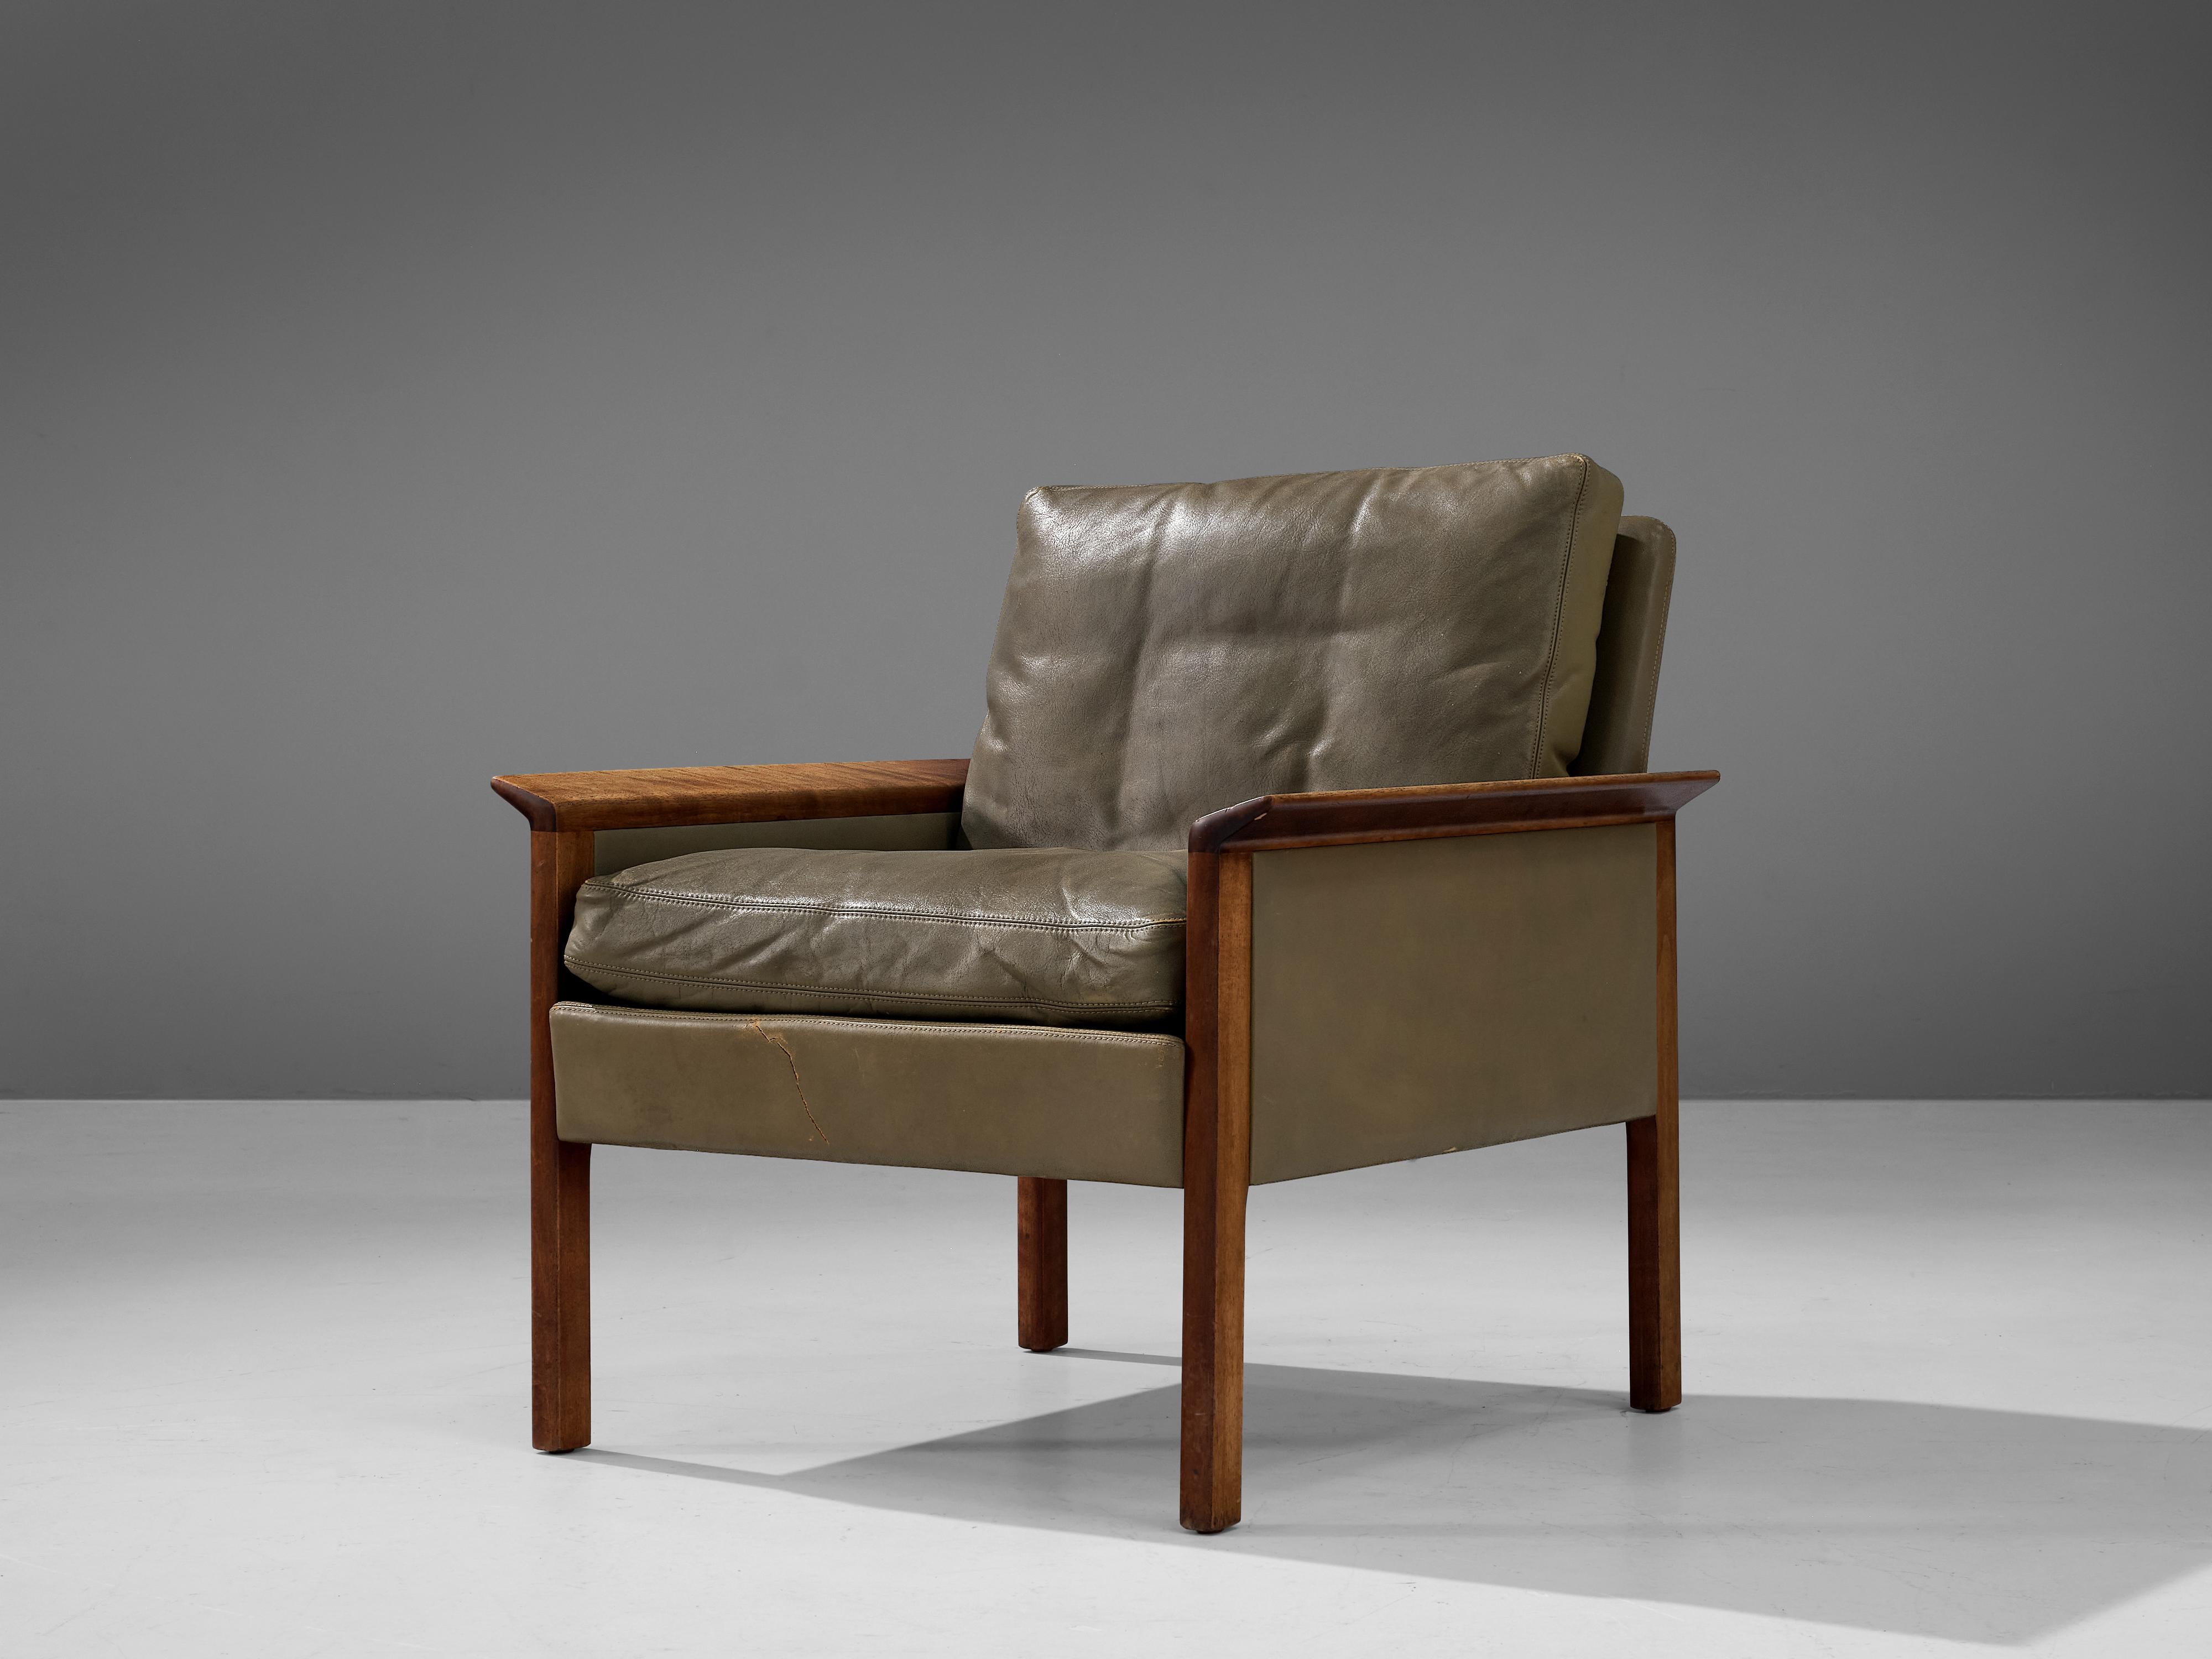 Hans Olsen for C/S Møbler, lounge chair model ‘400’, walnut, leather, Denmark, designed in 1966

Lounge chair upholstered in leather by Danish designer Hans Olsen. The design features typical traits of Scandinavian Modern design of the 1950/1960s.